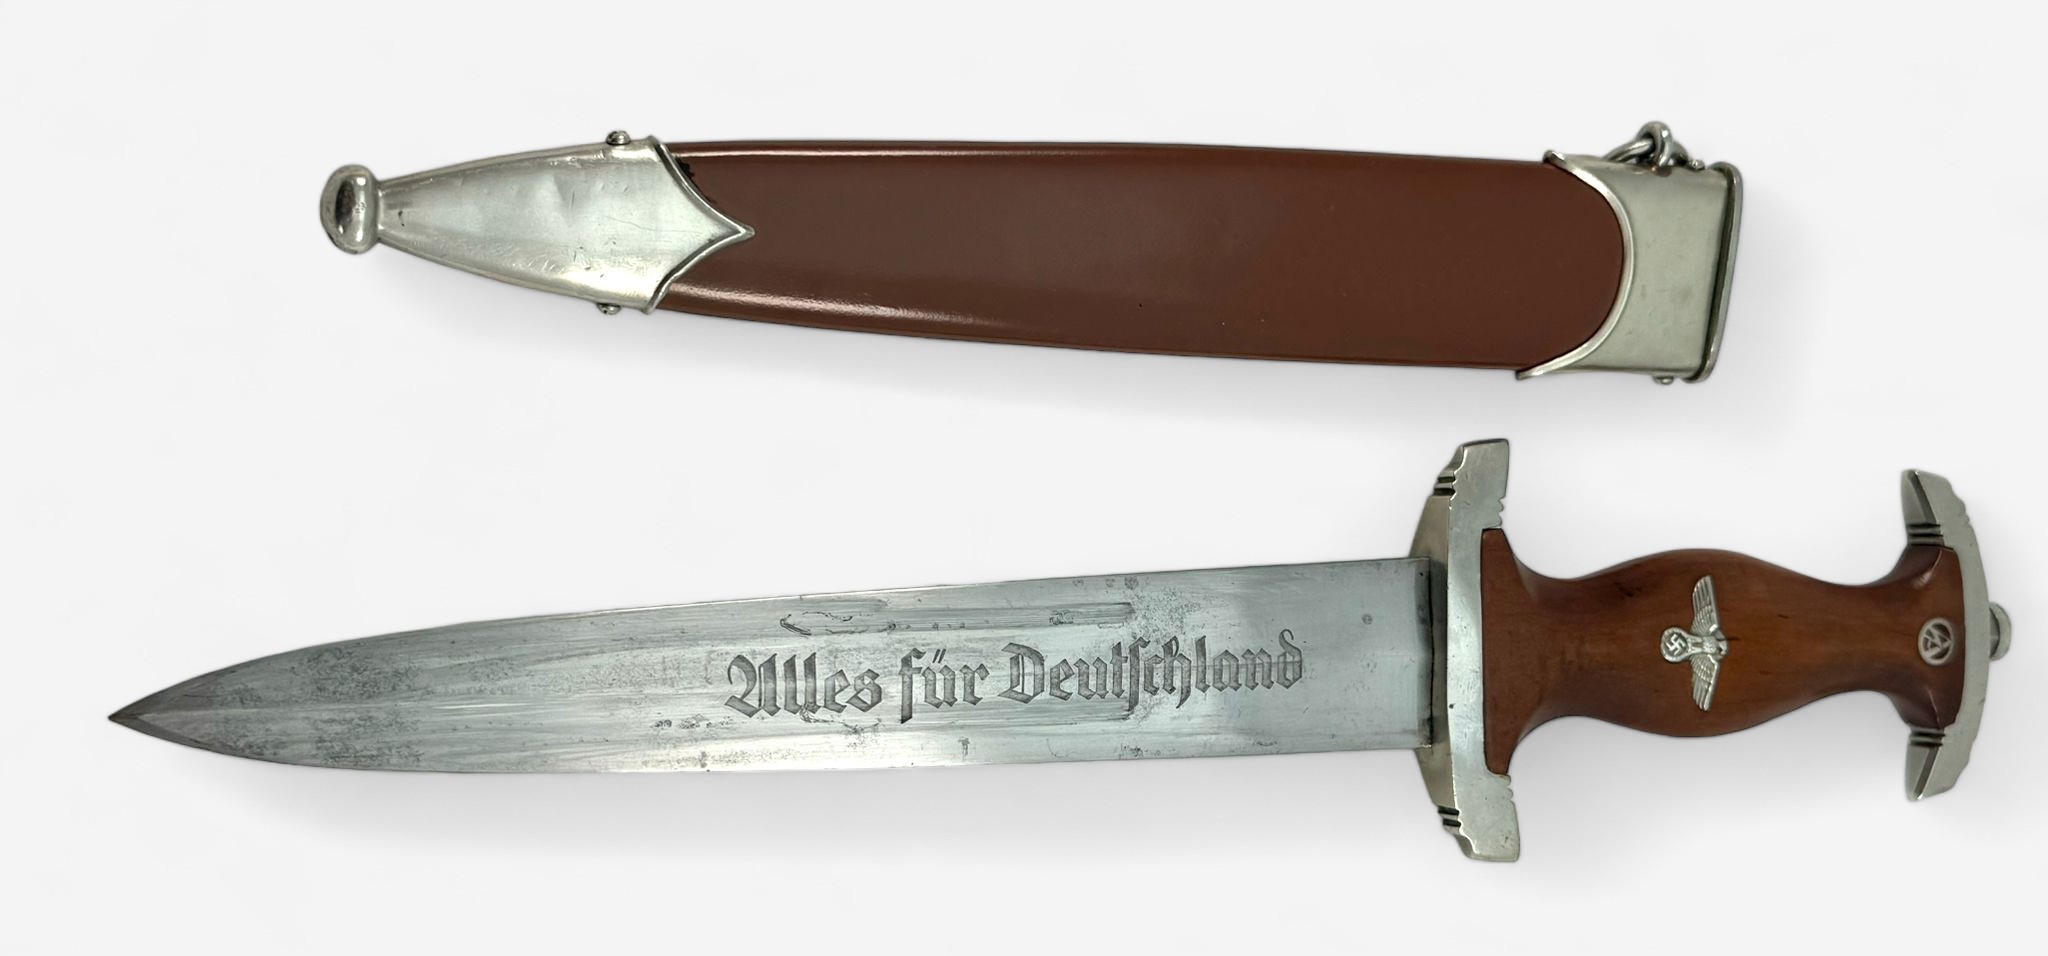 A WWII Second World War Third Reich German SA Officers dress dagger with wooden grip and inset SA